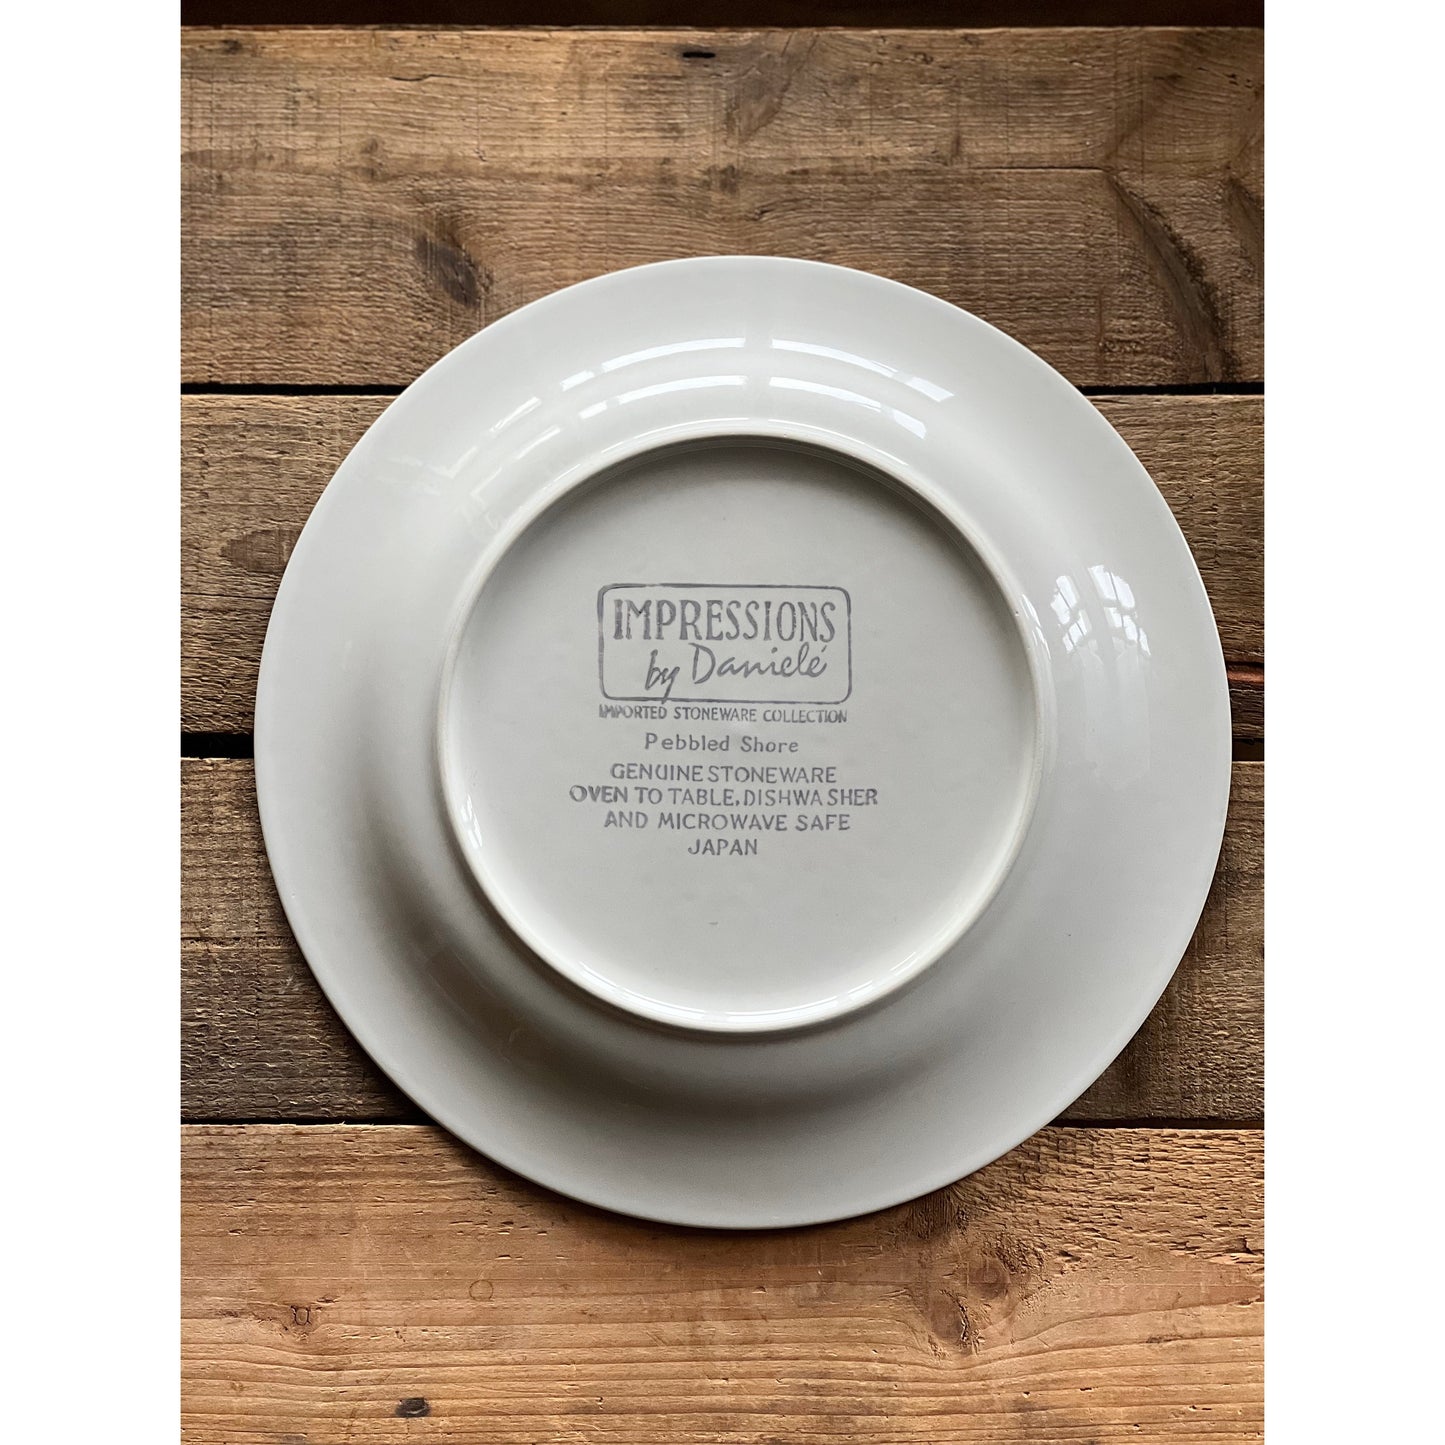 Impressions by Daniele Pebbled Shore Set of 4 Stoneware Dinner Plates